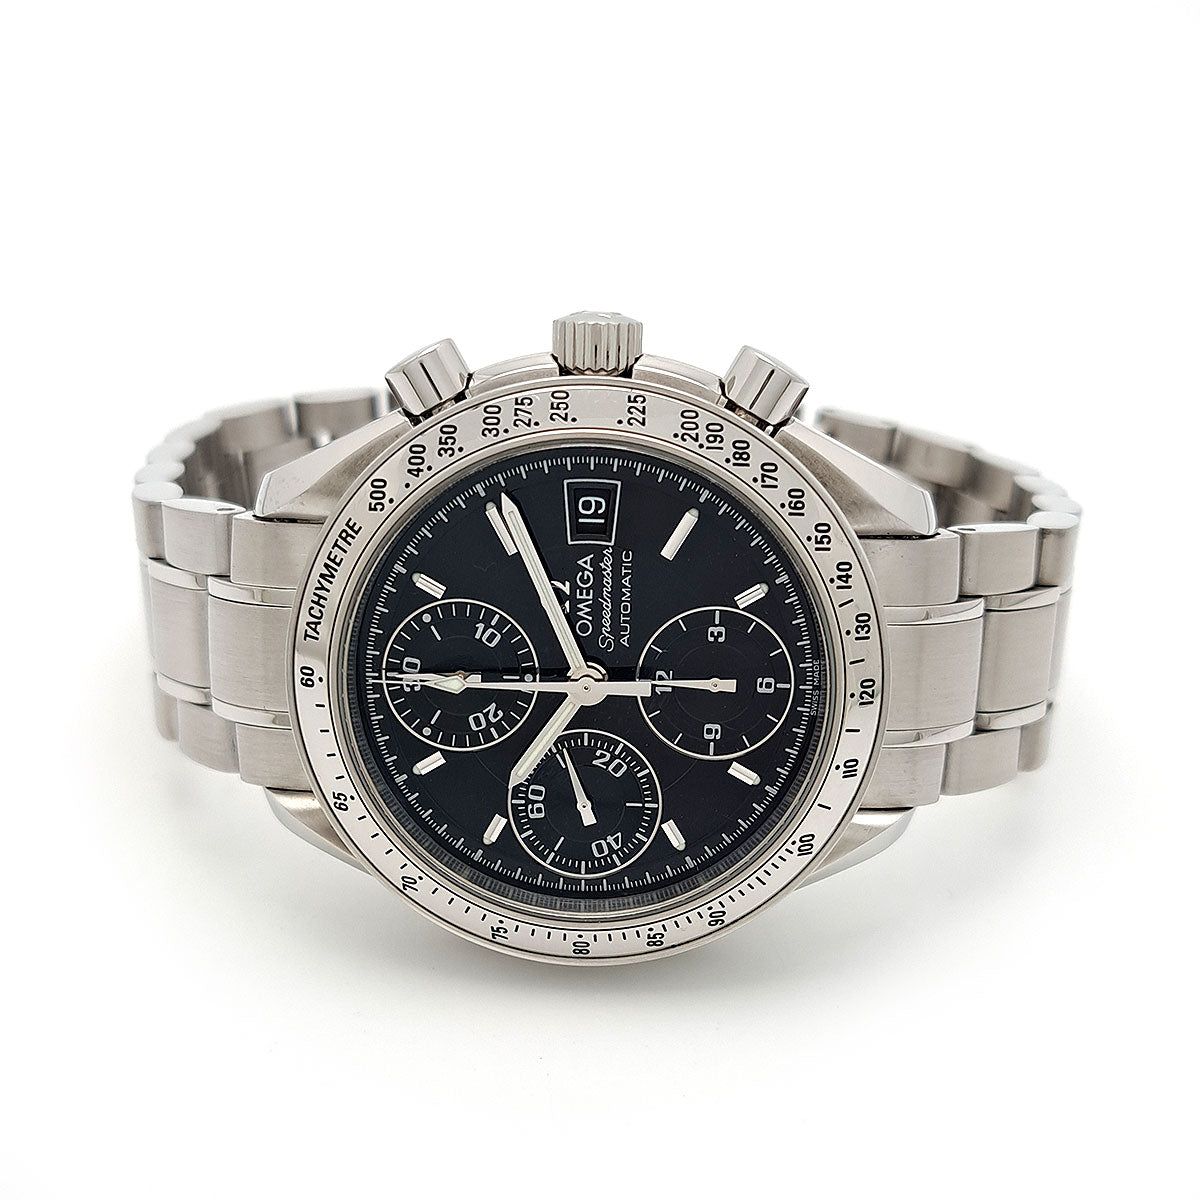 OMEGA Speedmaster Date 3513.50 Automatic Stainless Steel Men’s Pre-owned Watch 3513.5